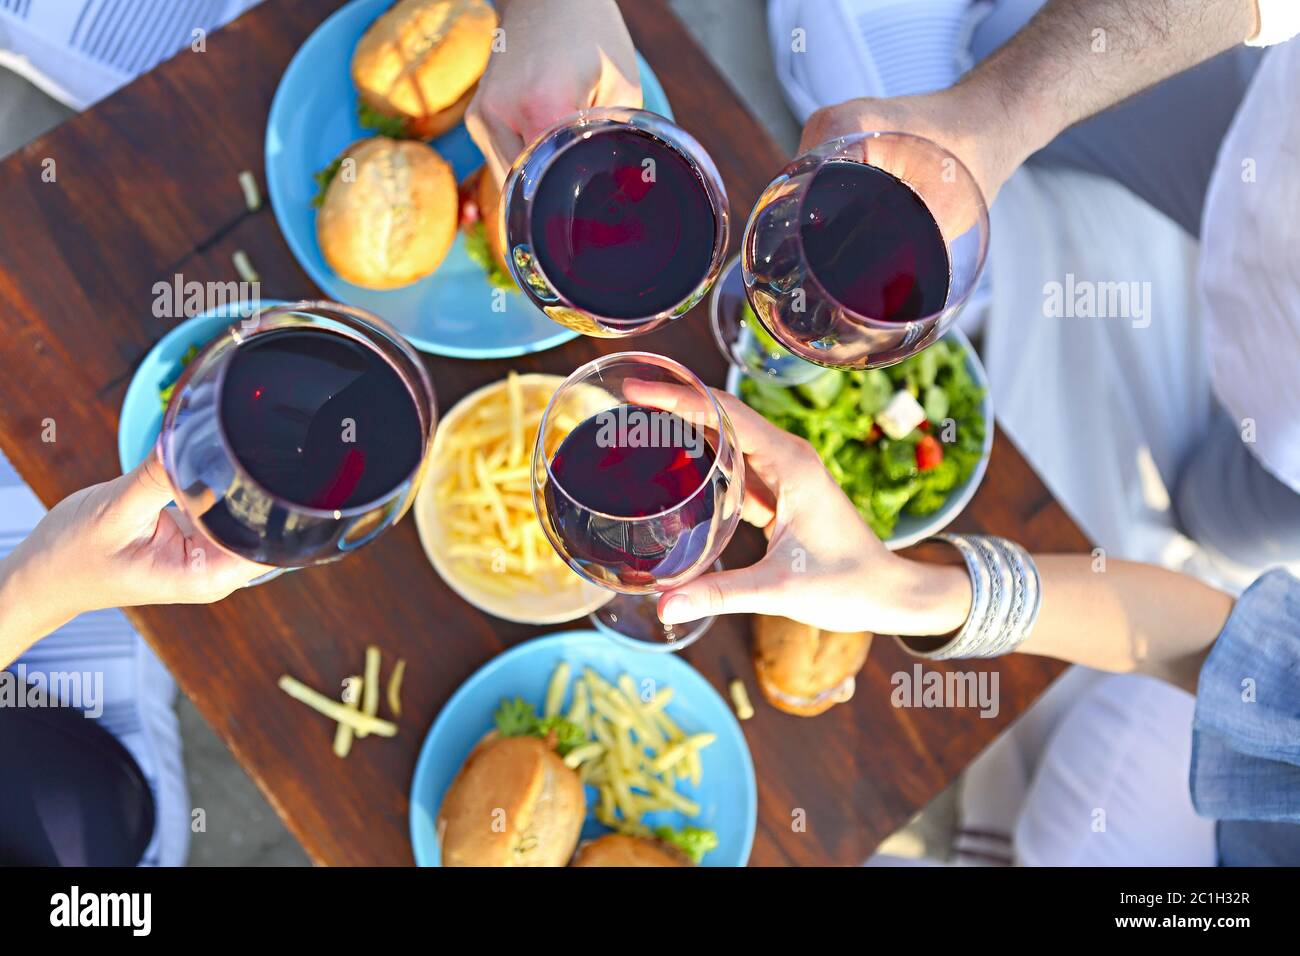 Summer picnic with red wine Stock Photo